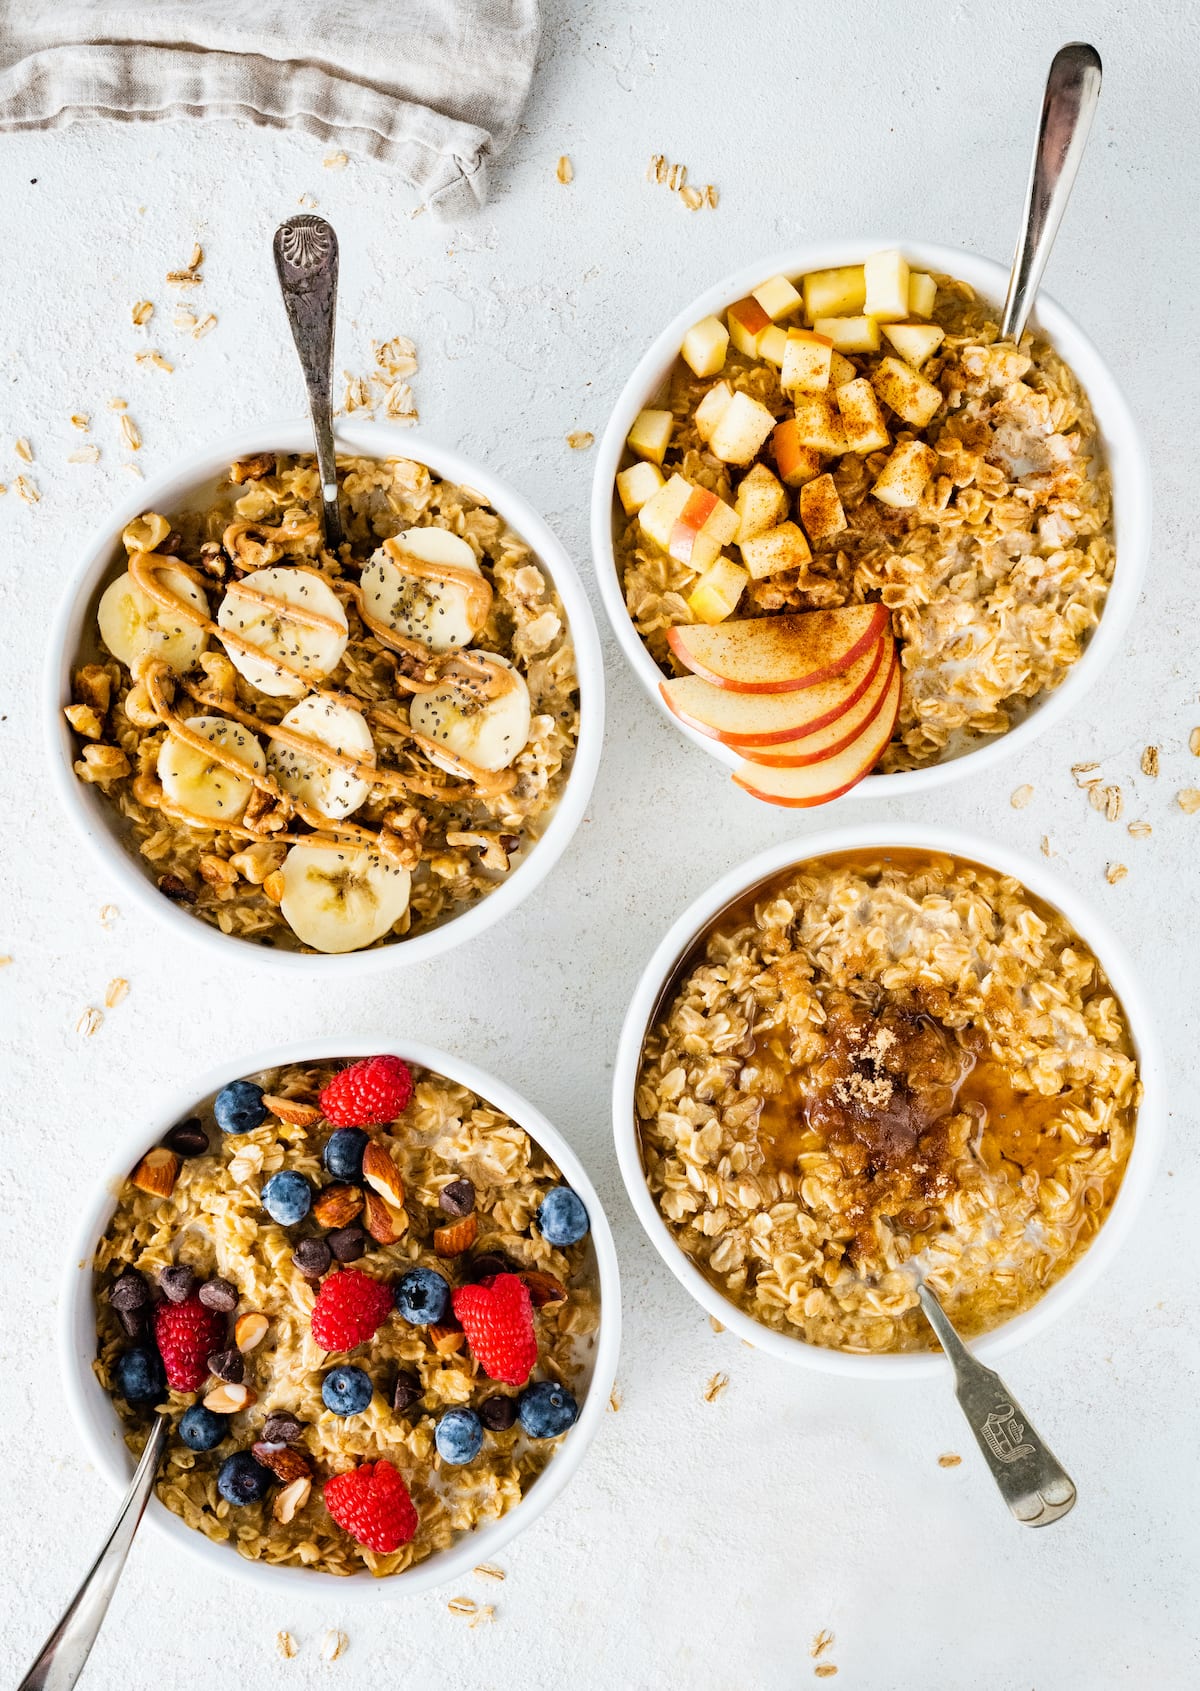 Four bowls of different oatmeal flavor variations: banana nut, apple cinnamon, maple brown sugar and berry almond.